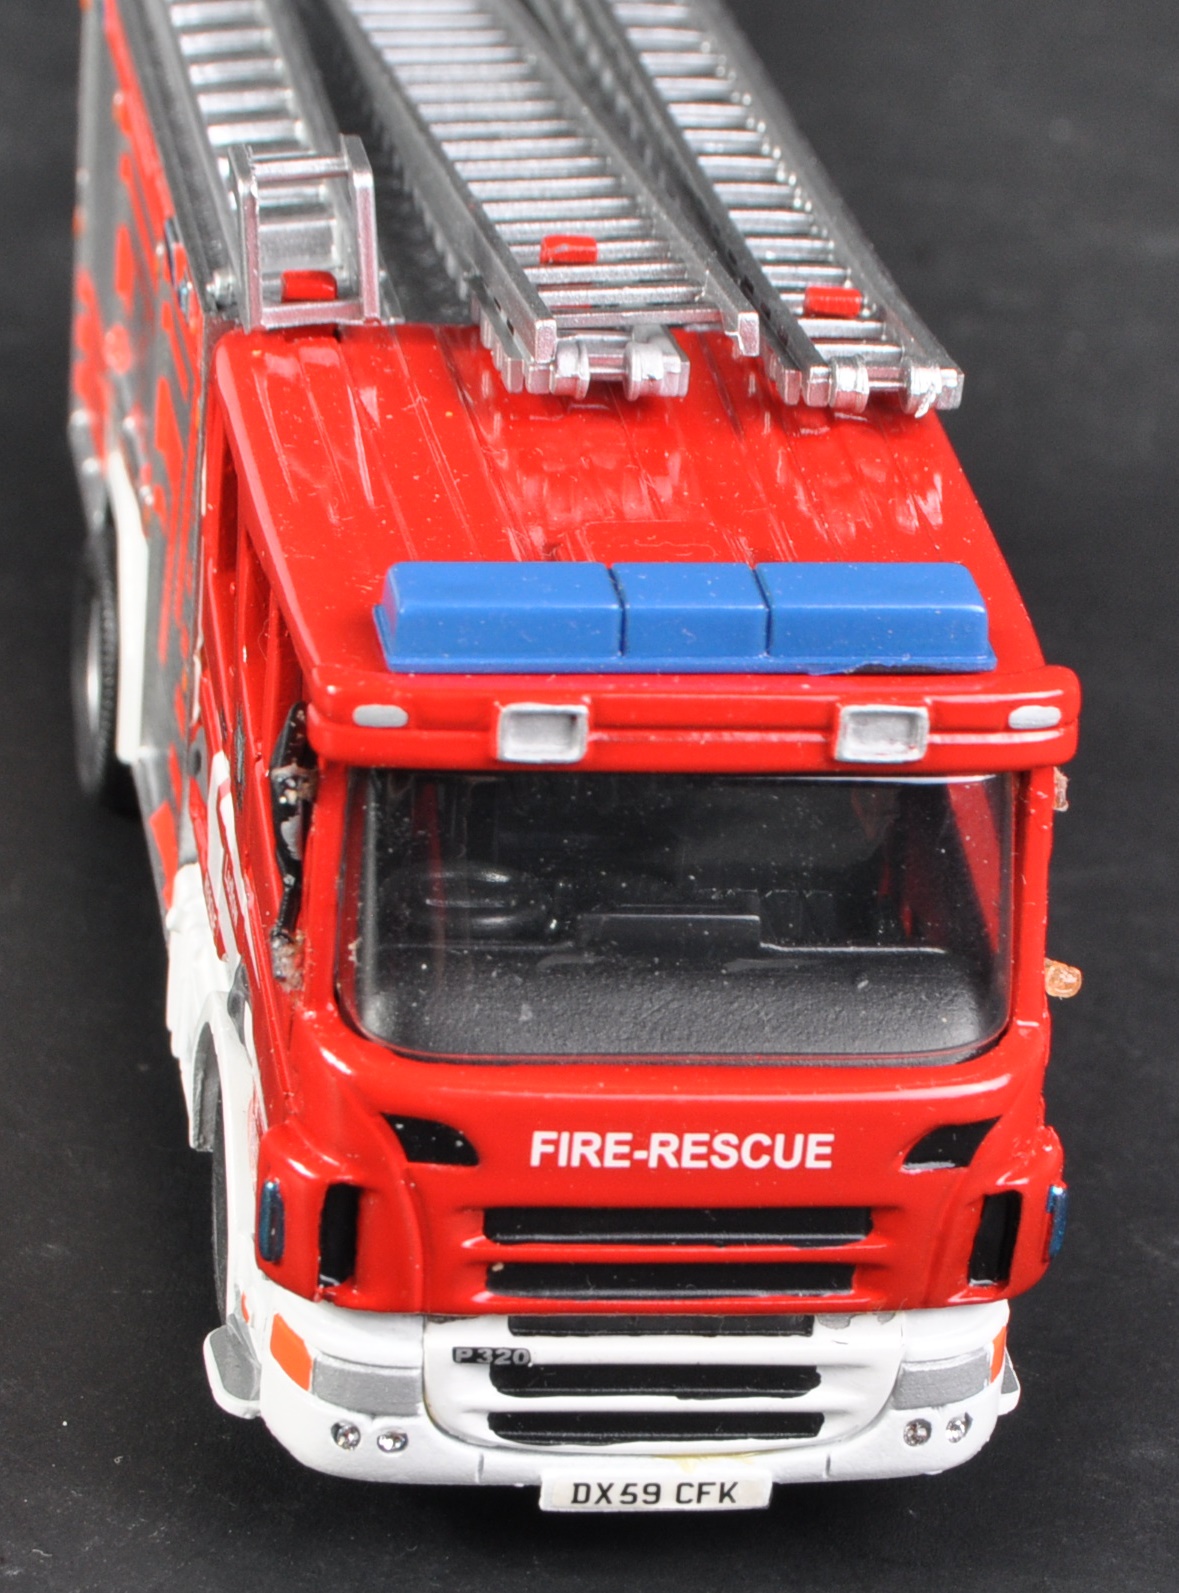 FIRE BRIGADE MODELS 1/50 SCALE DIECAST MODEL FIRE ENGINE - Image 4 of 6